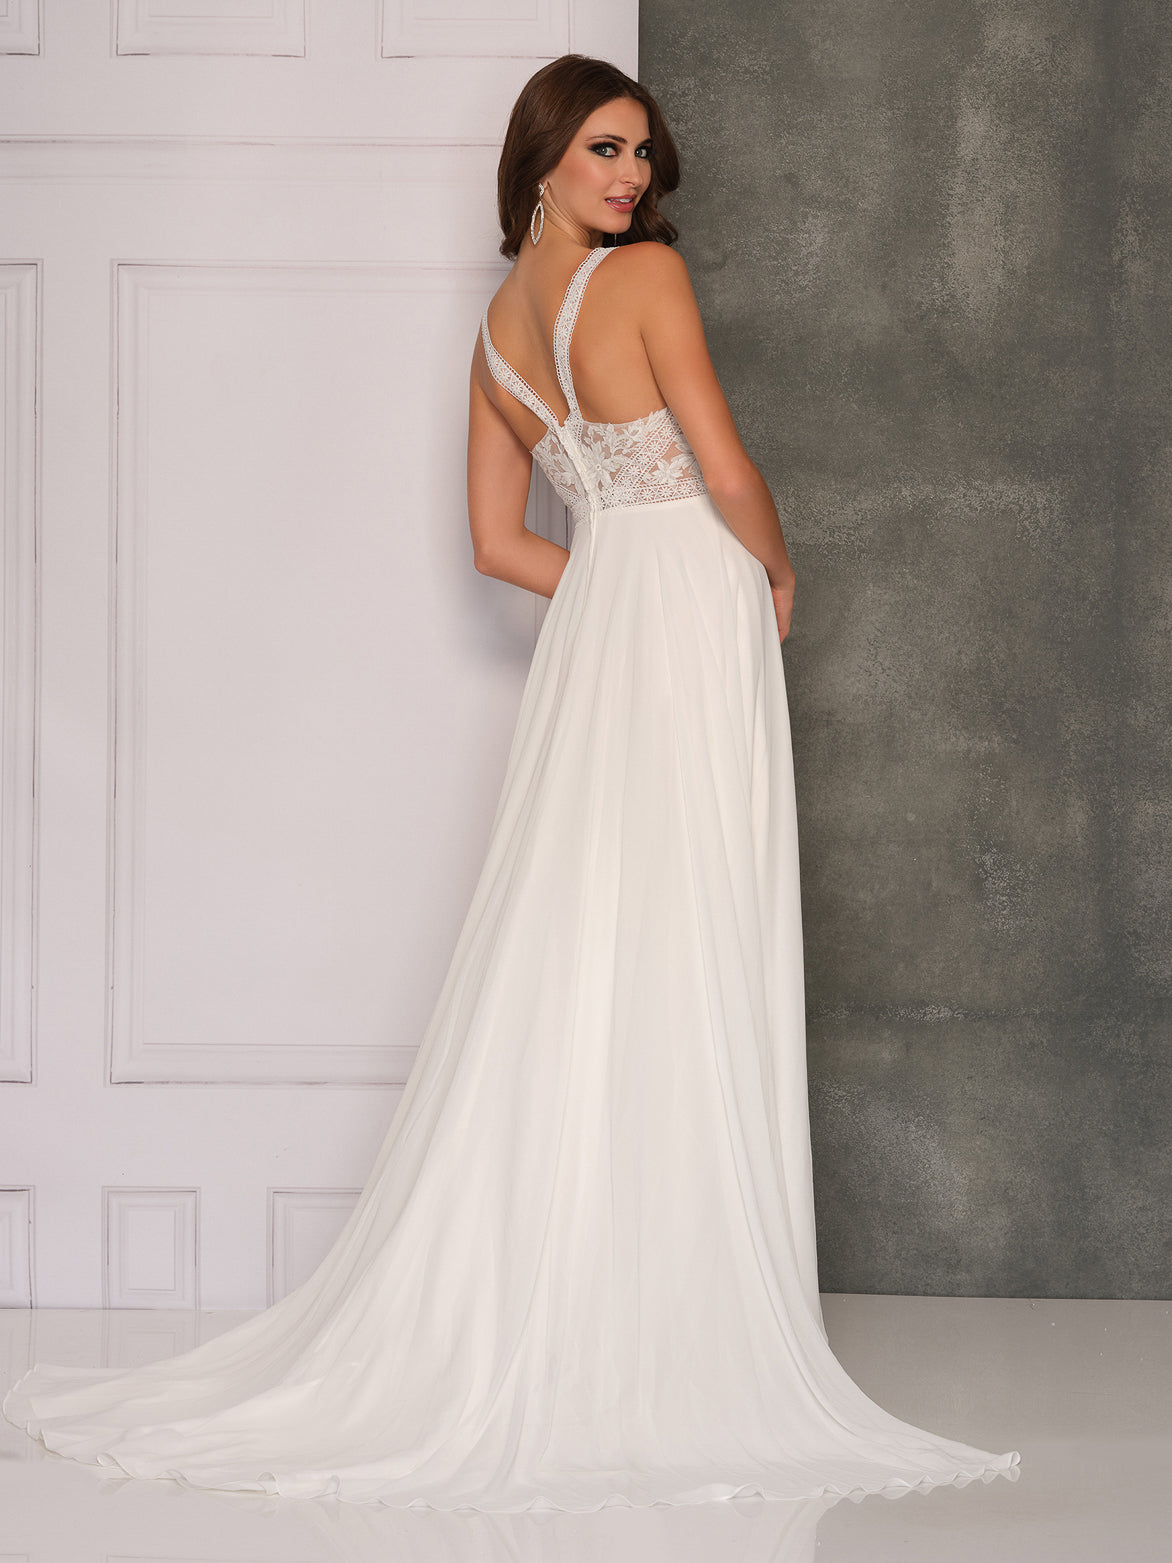 RACER BACK LACE TOP WEDDING GOWN